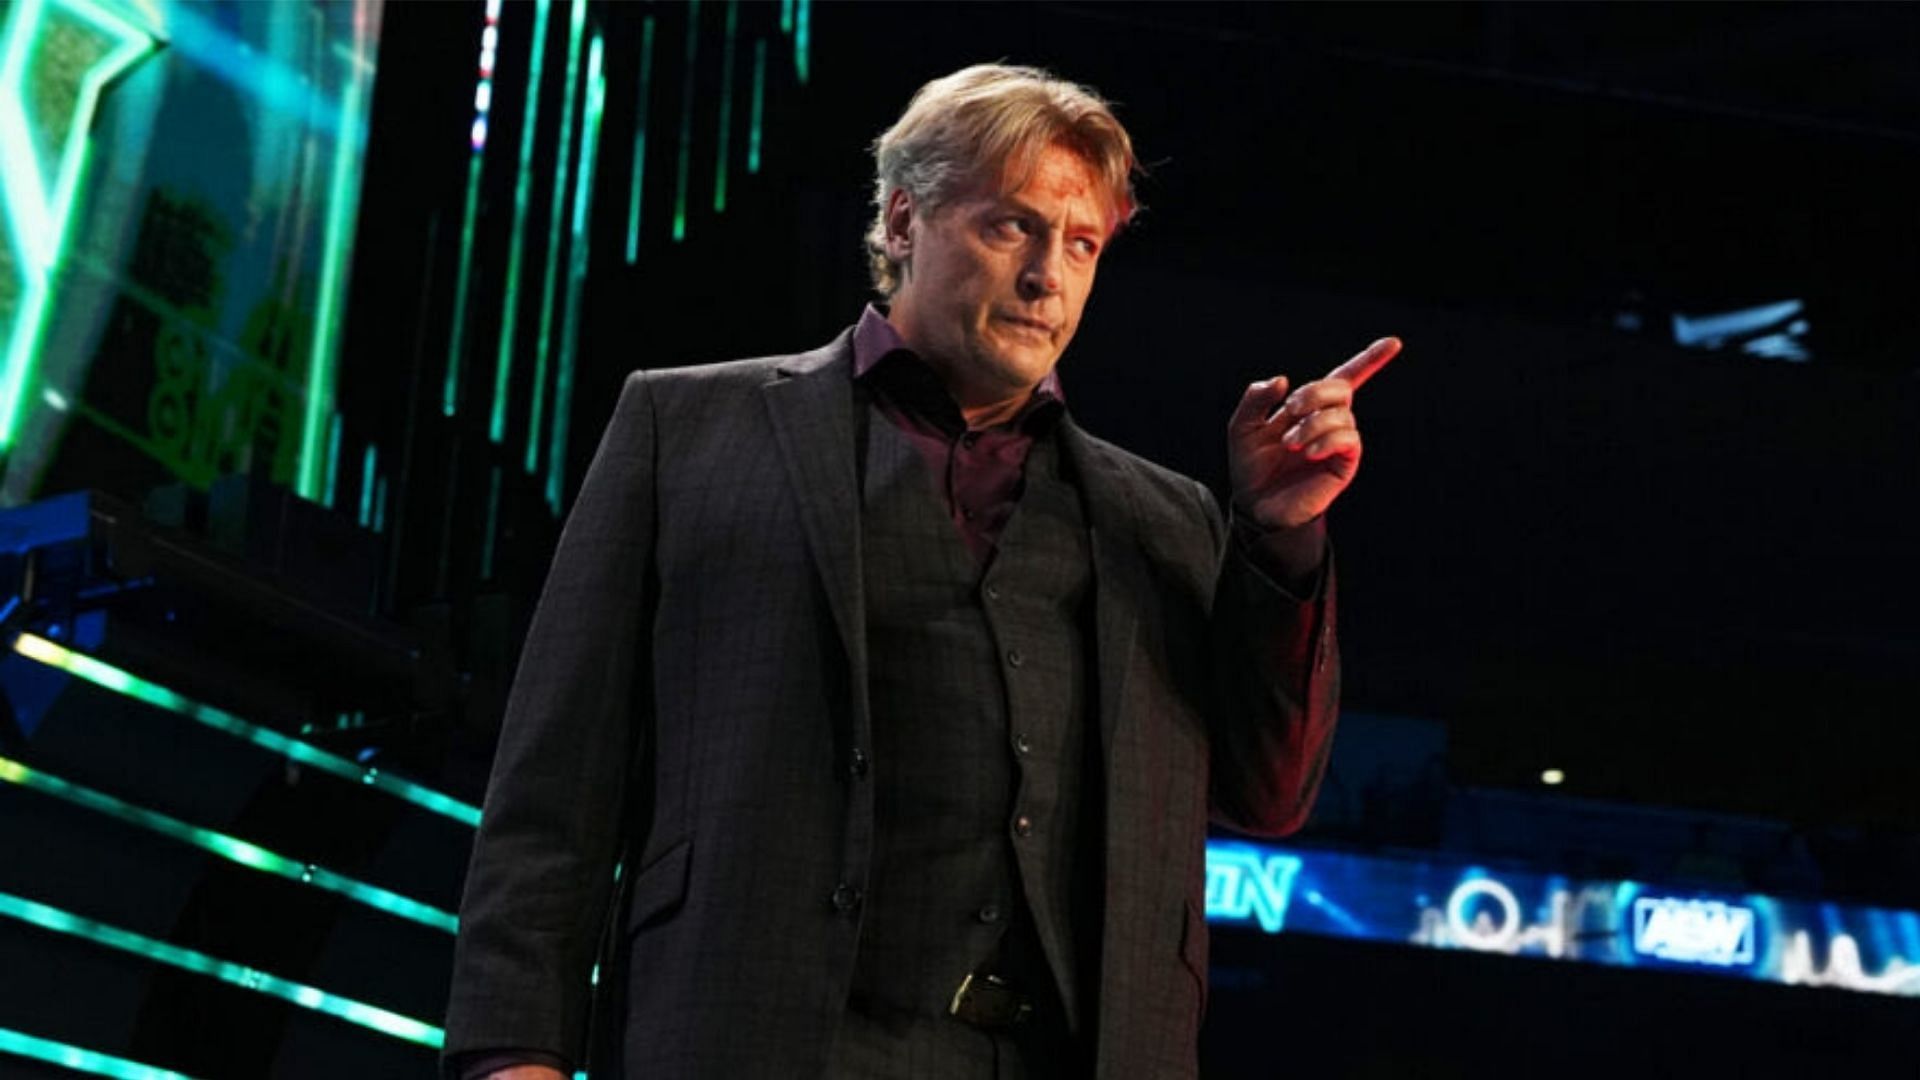 William Regal has aligned himself with Bryan Danielson and Jon Moxley in AEW